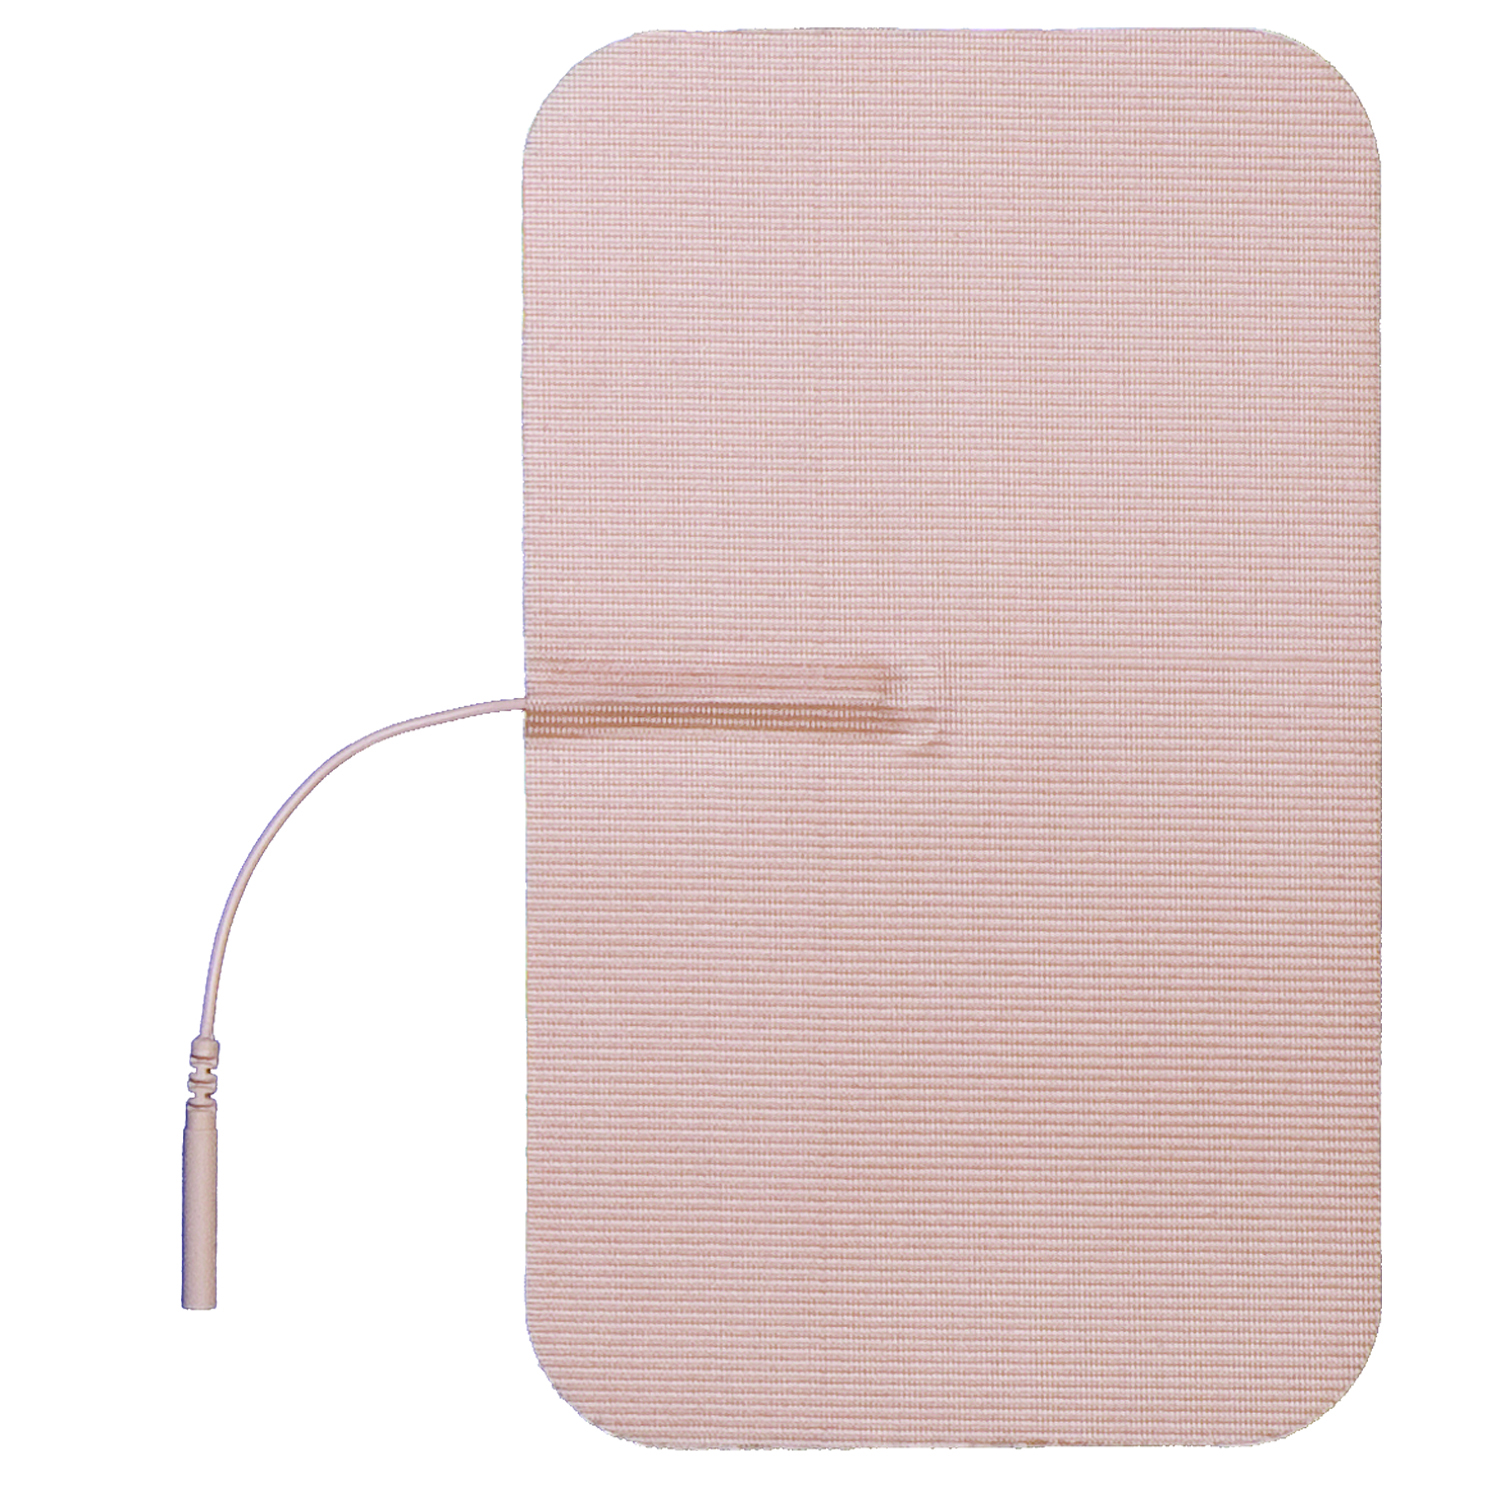 4" x 7" Rectangle Microvascular Electrotherapy Electrodes 1/pack